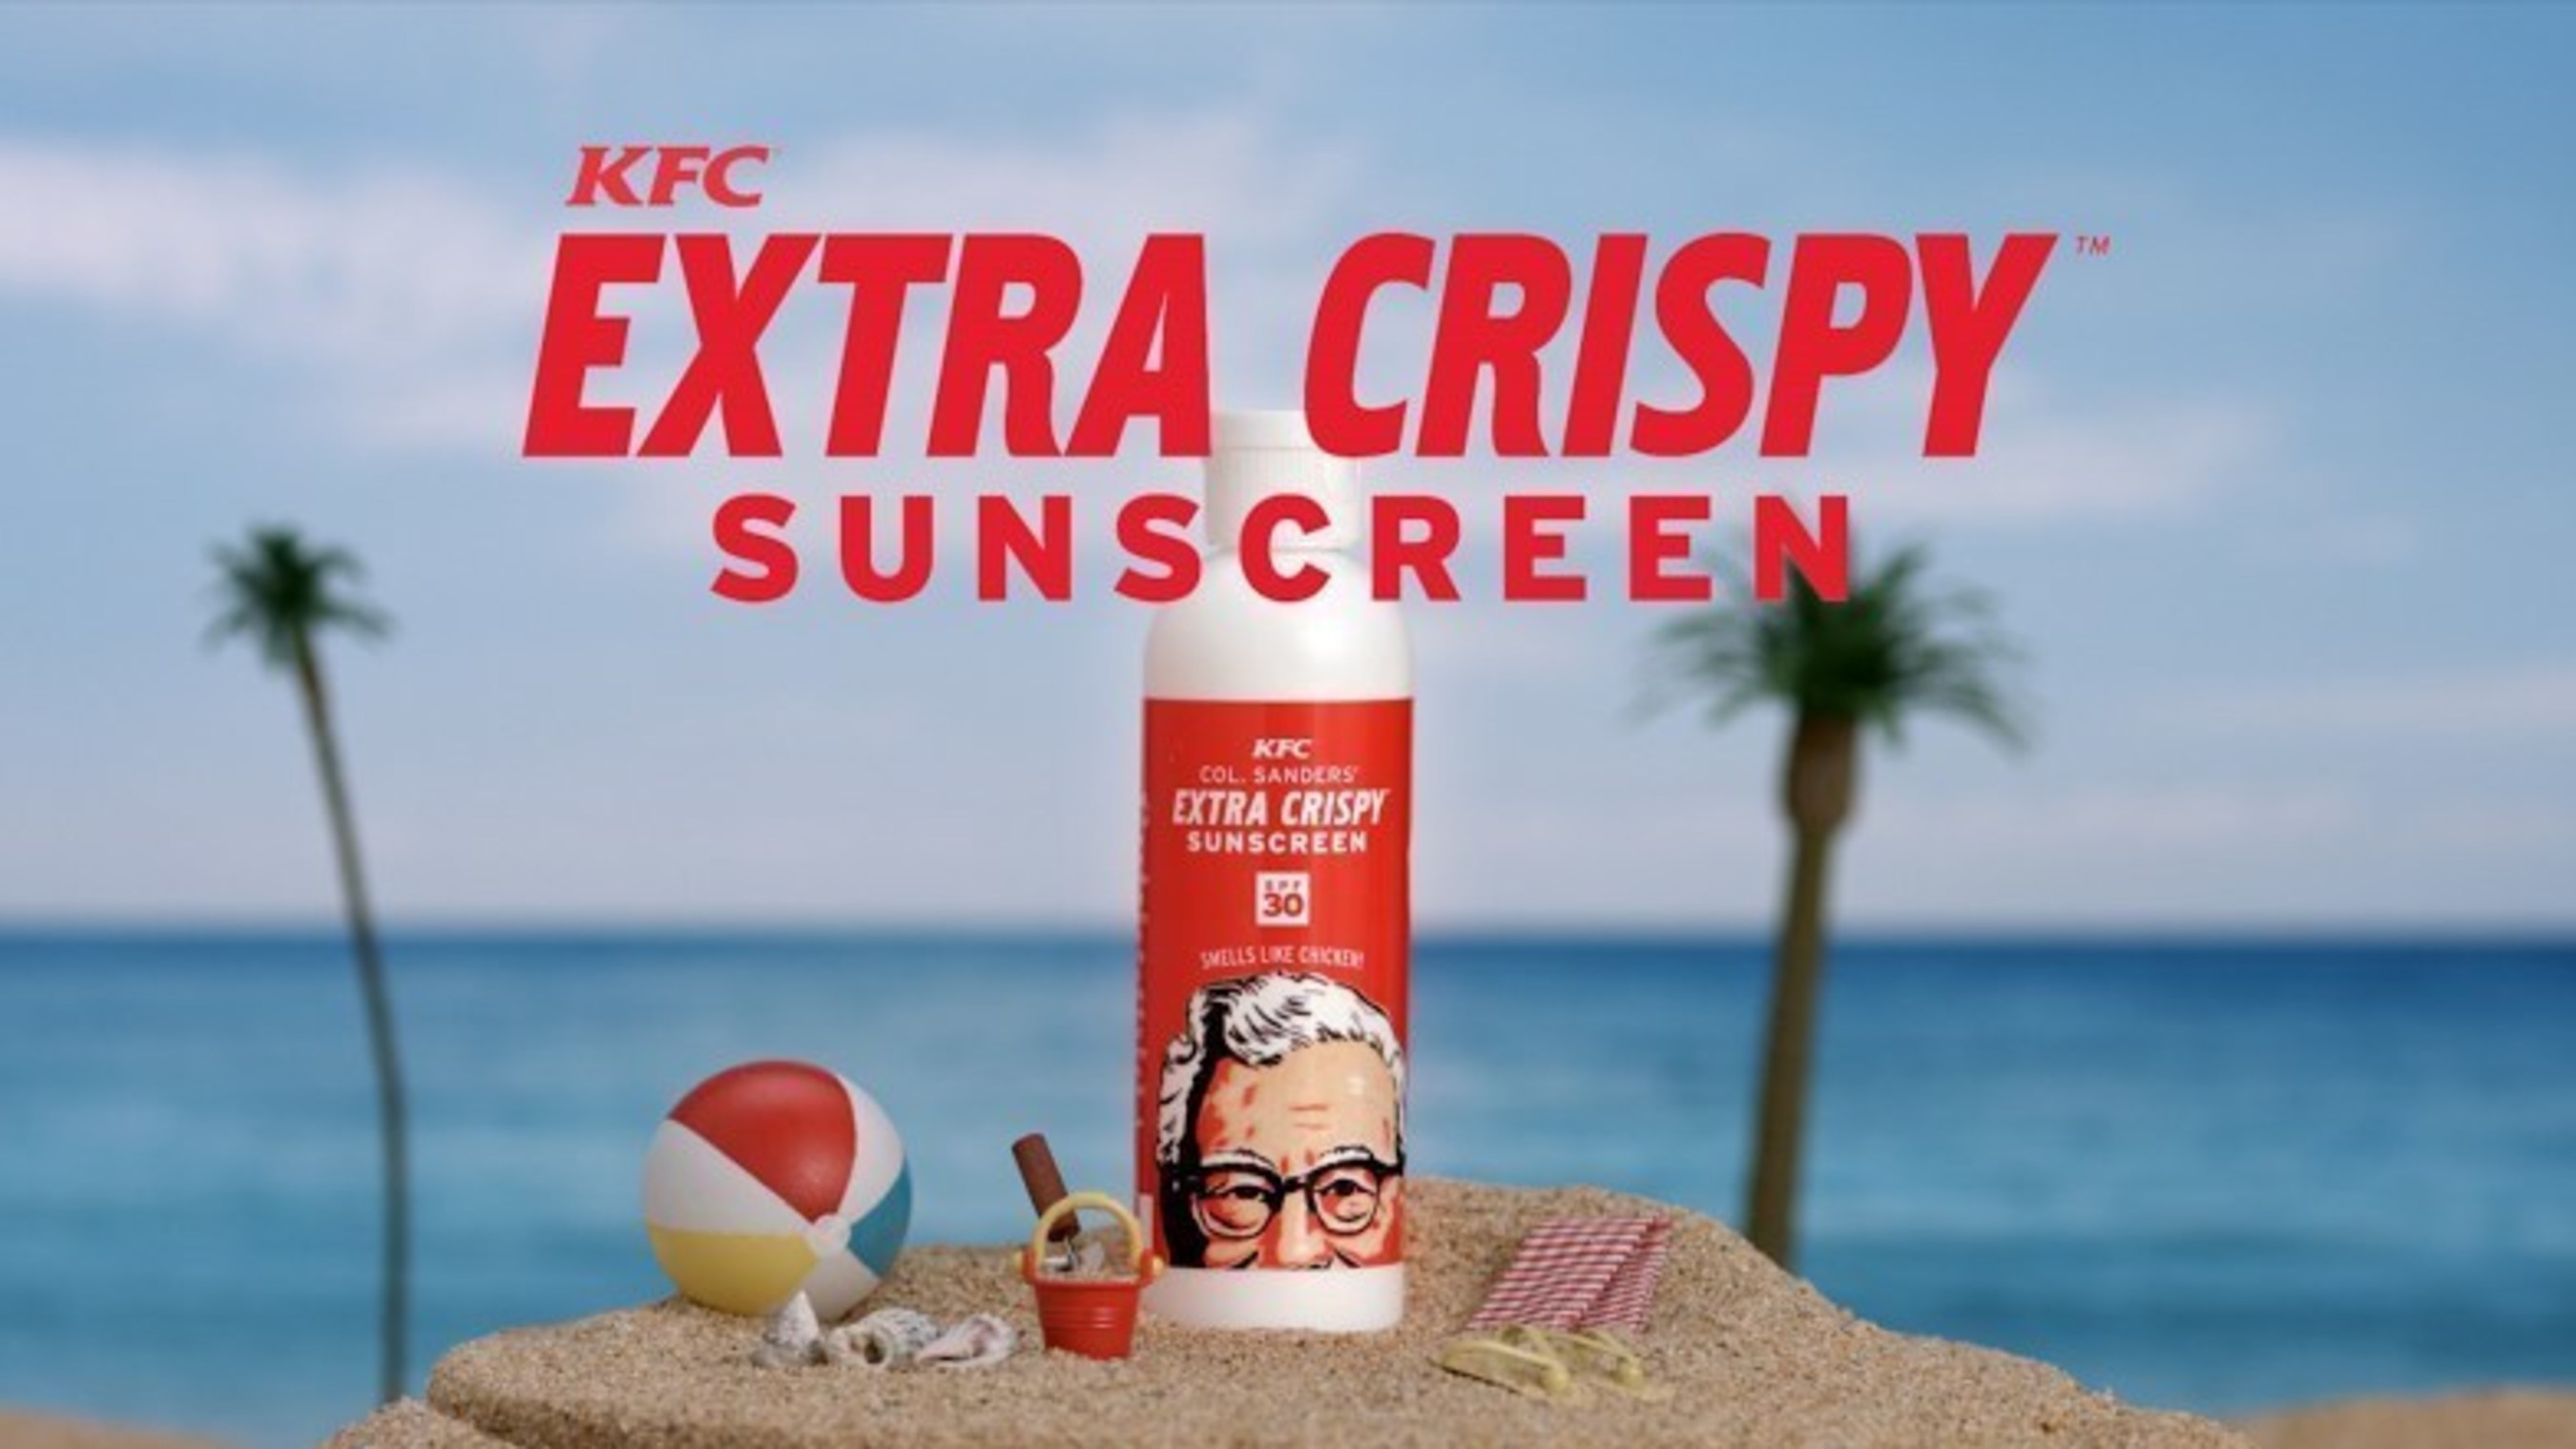 So many Americans wanted to lounge in the sun while smelling like KFC hand-breaded and freshly prepared fried chicken, that KFC is making more fried chicken-scented sunscreen available.